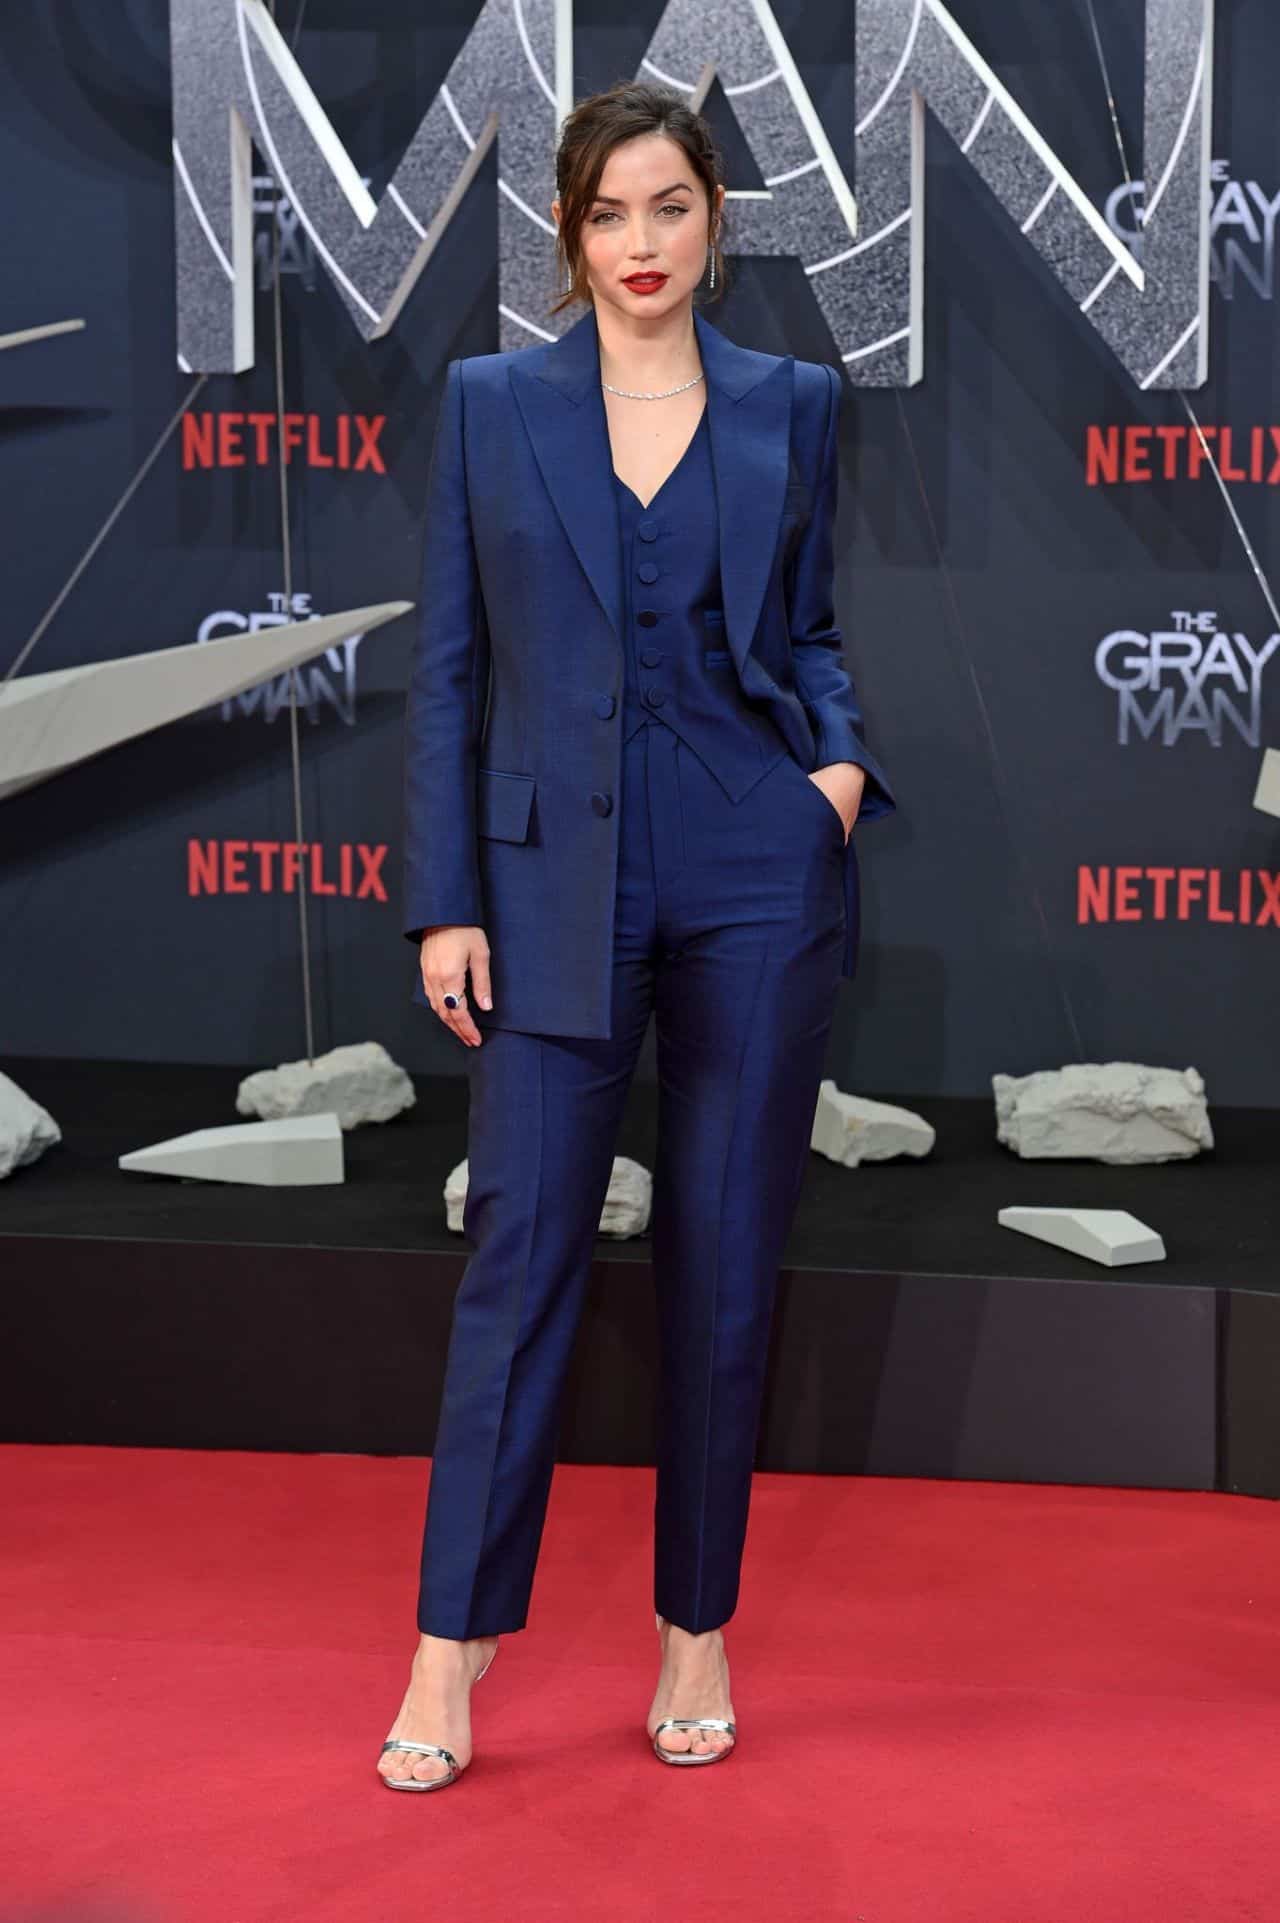 Ana de Armas Shows her CIA Look at "The Gray Man" Premiere in Berlin